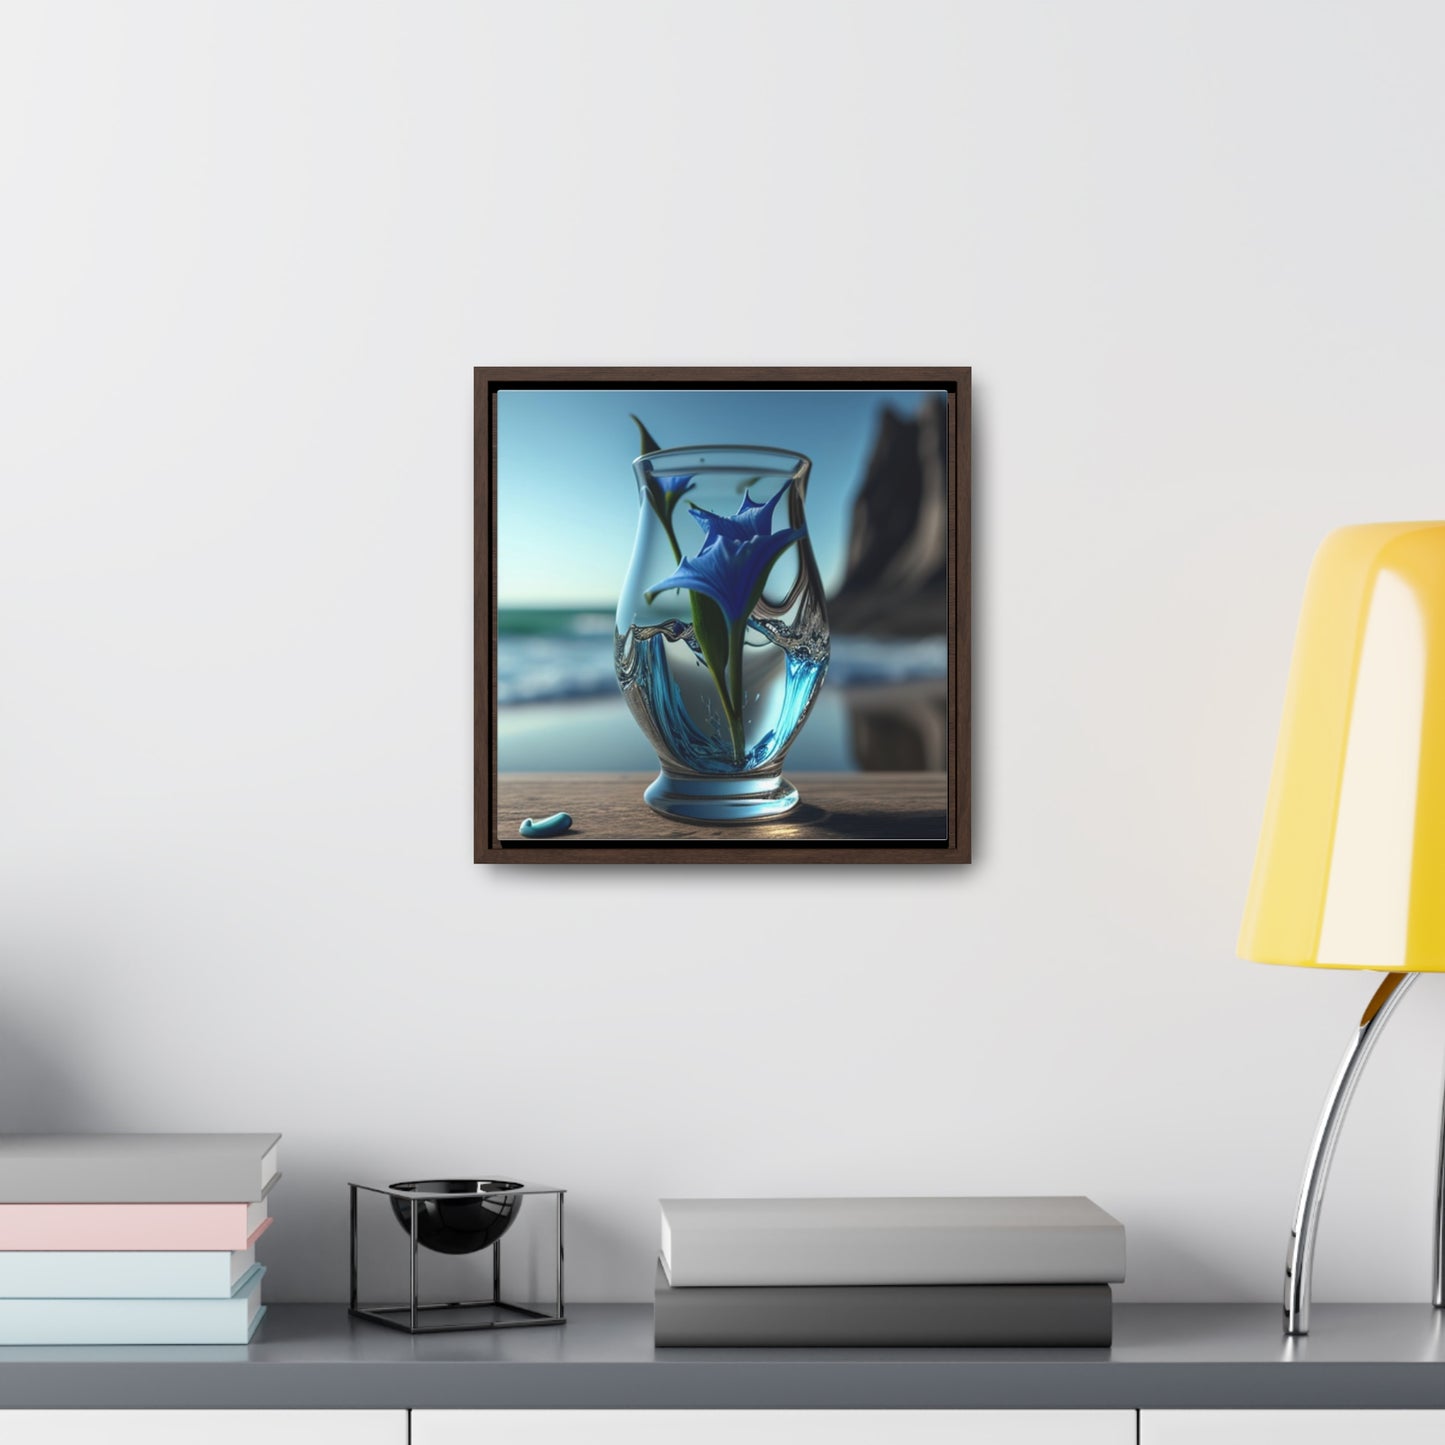 Gallery Canvas Wraps, Square Frame The Bluebell 2